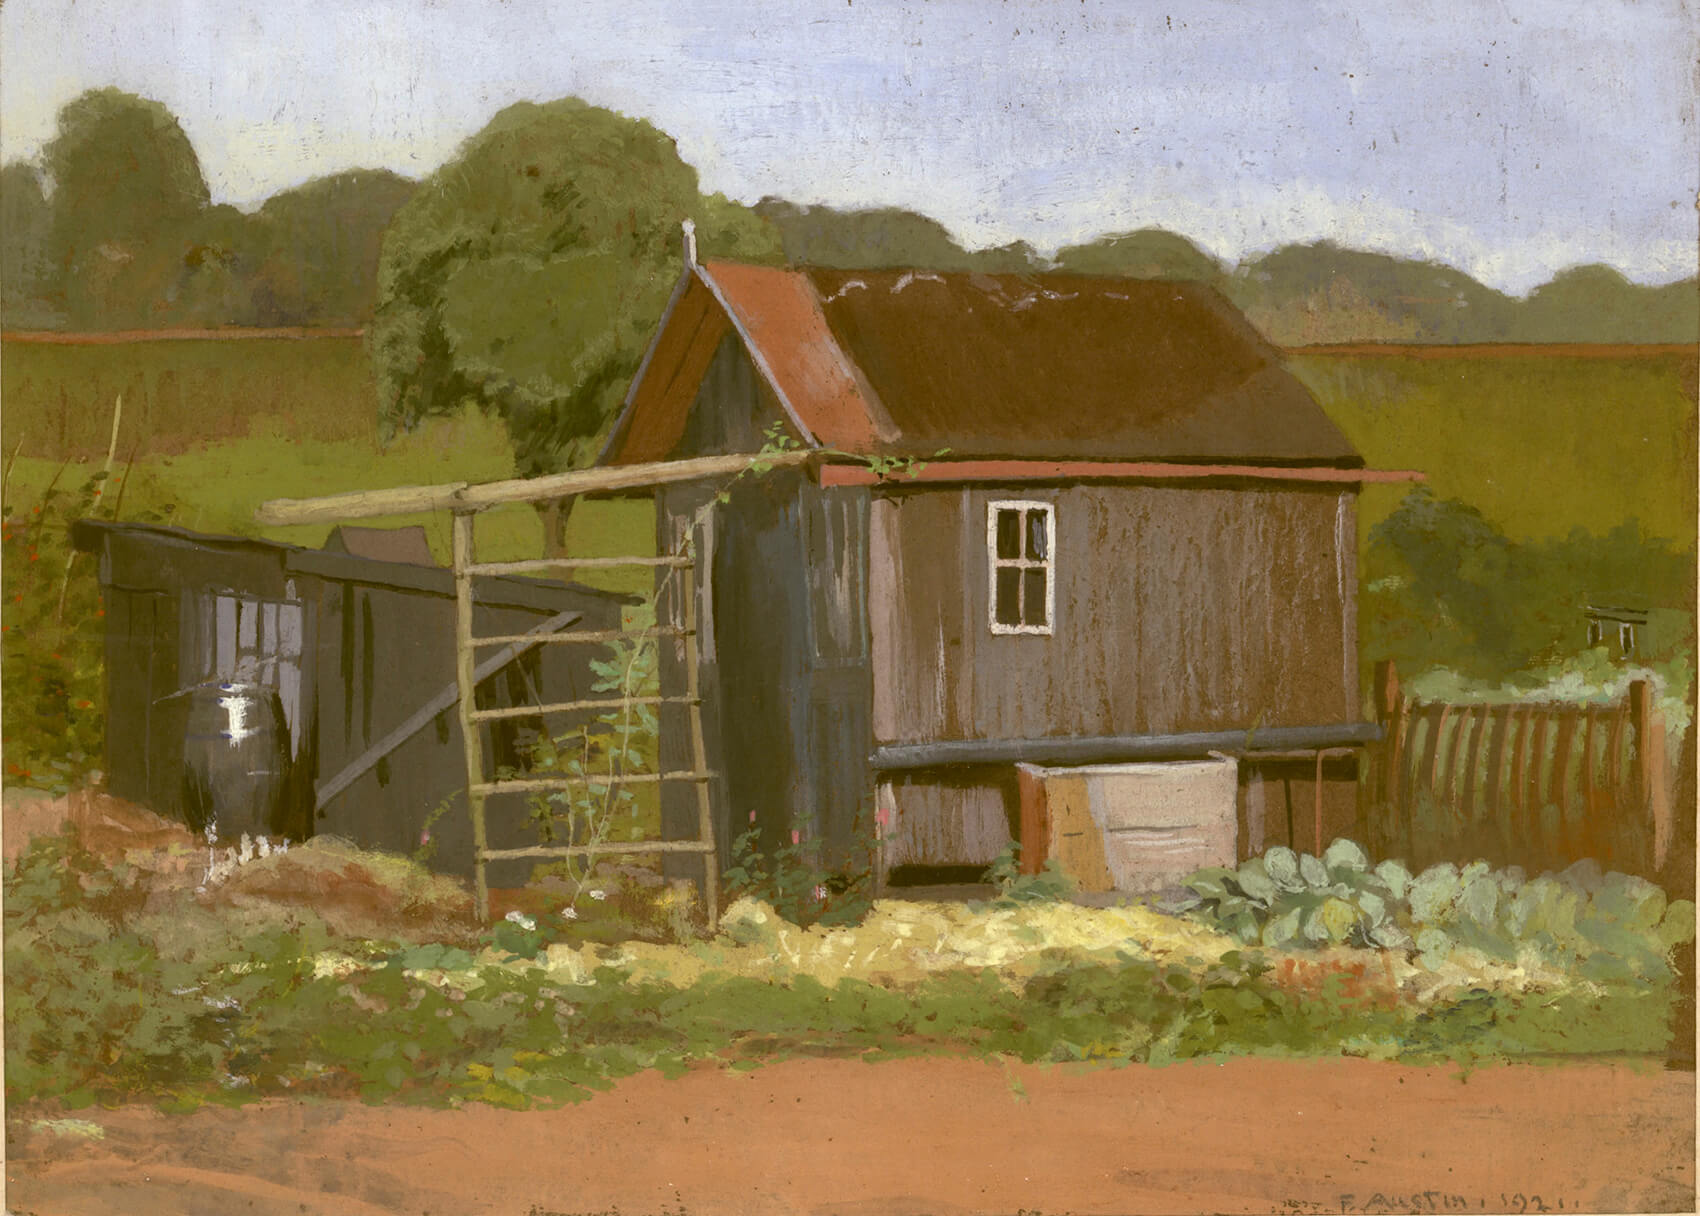 Frederick Austin - Study of Shed and Cabbage Garden